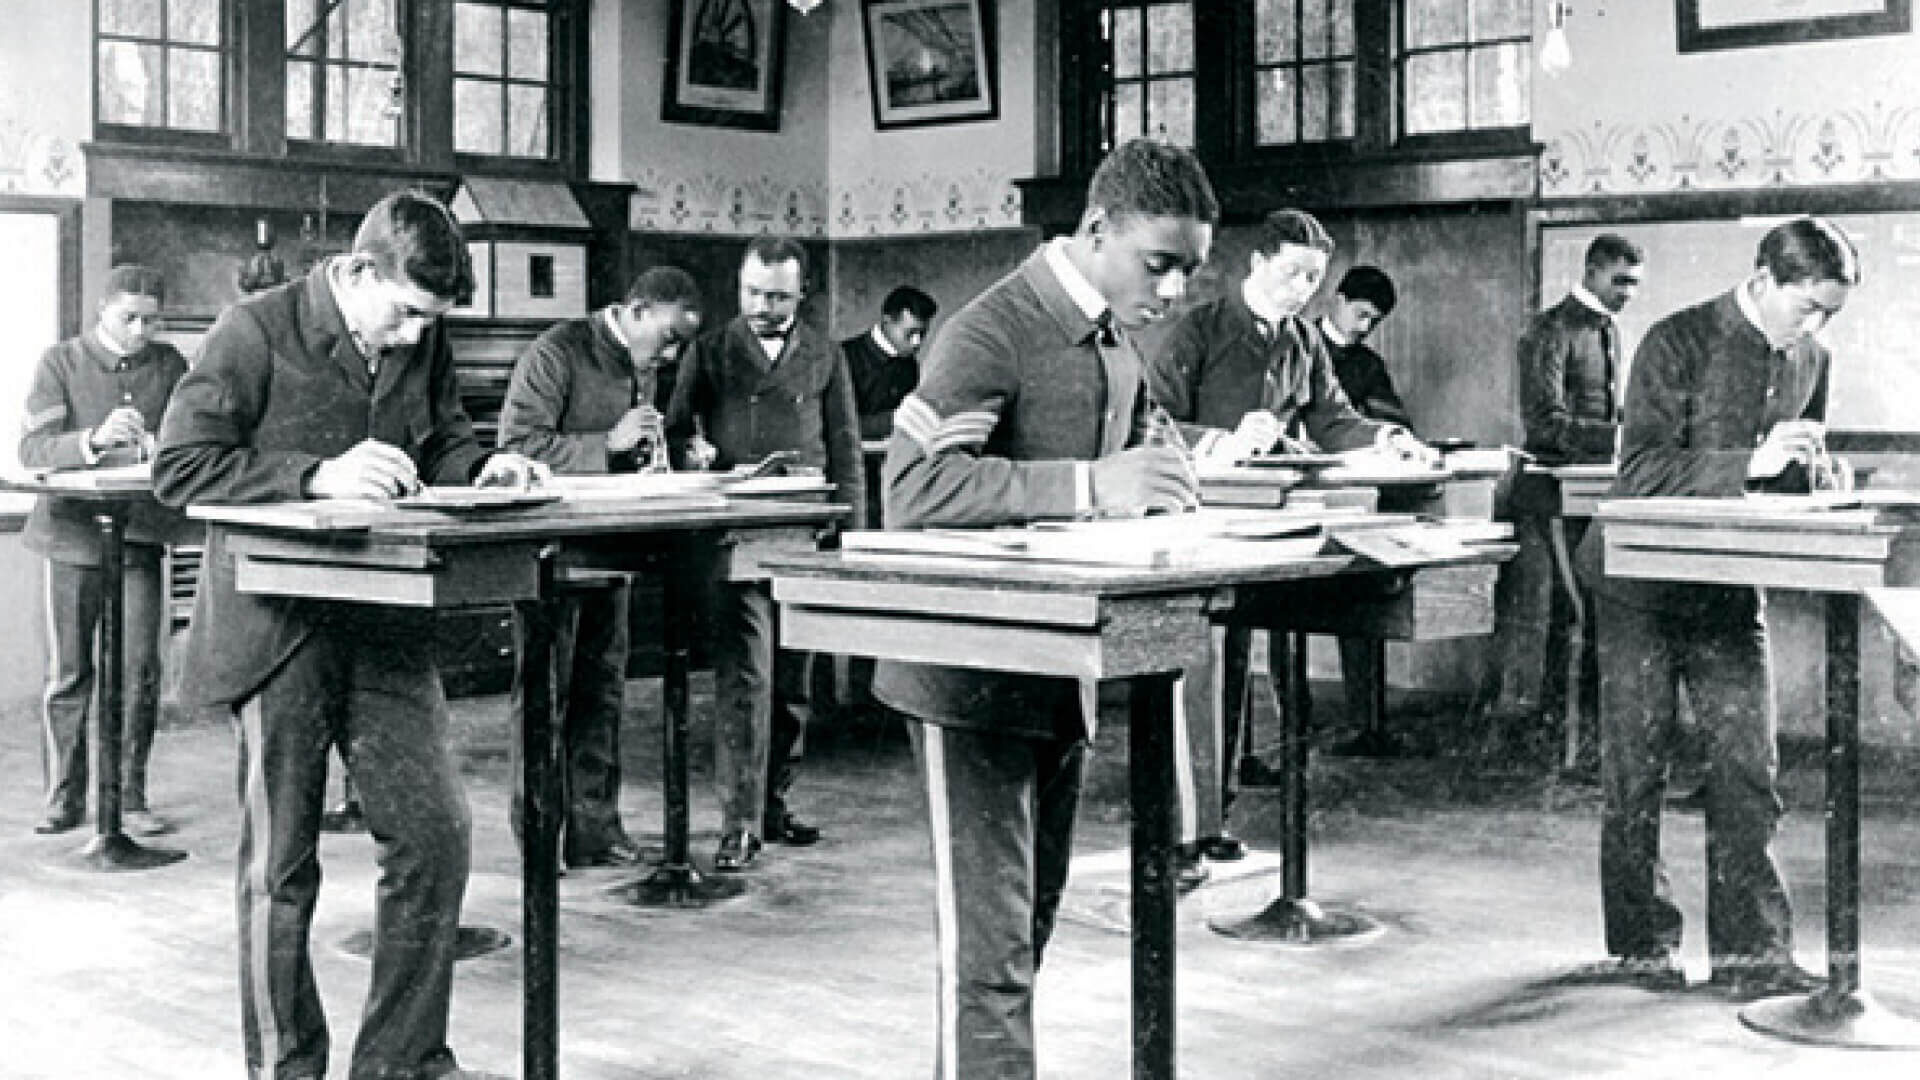 Photo of Lewis teaching in a classroom of students at desks.